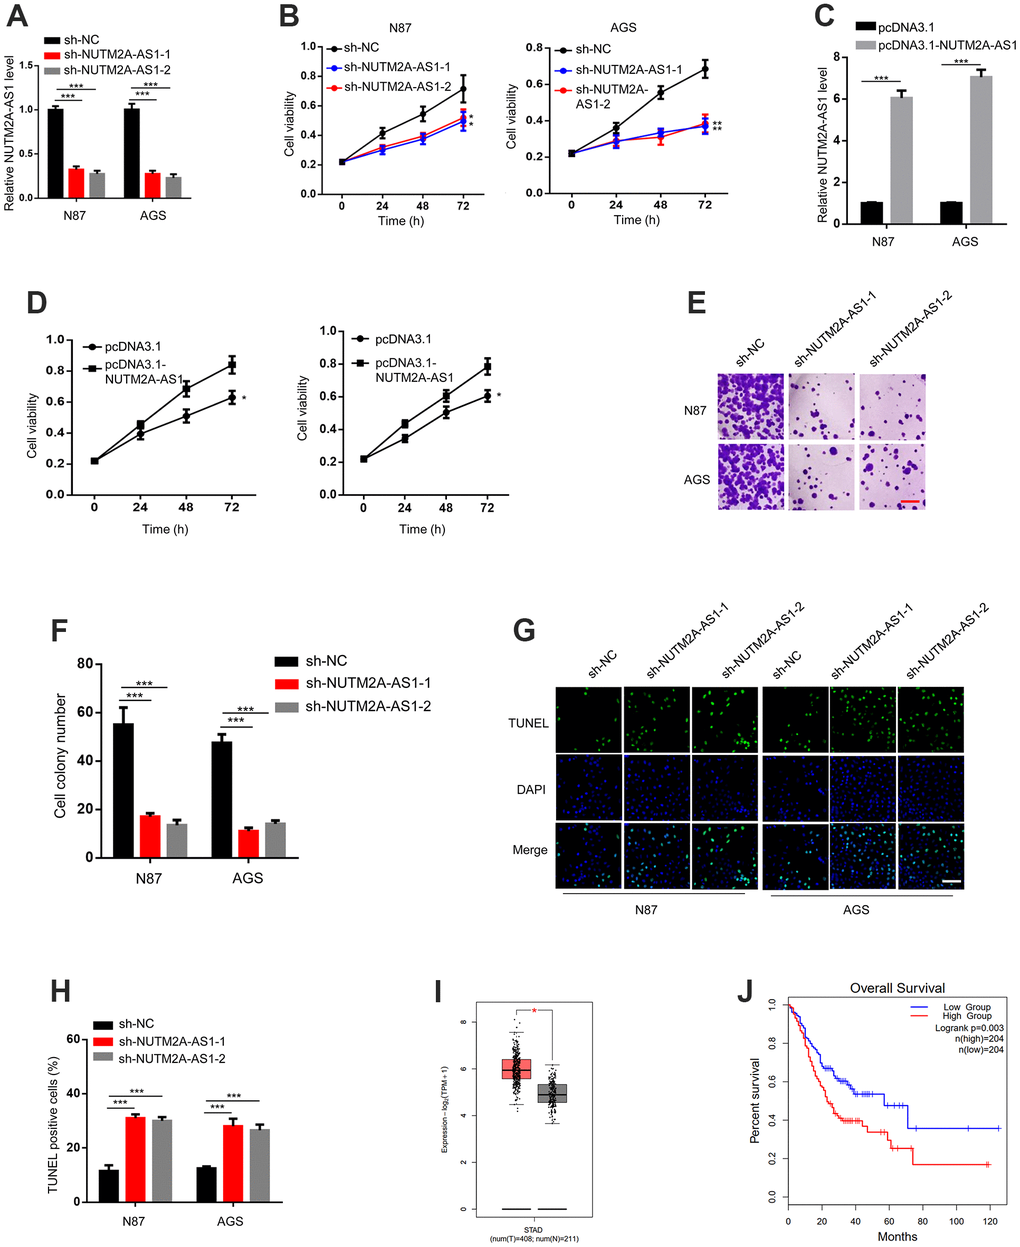 The loss of NUTM2A-AS1 attenuates GC tumorigenesis following matrine treatment. (A) The RT-qPCR was employed to evaluate the levels of NUTM2A-AS1 in N87 and AGS cells transfected with sh-NC, sh-NUTM2A-AS1-1, or sh-NUTM2A-AS1-2. ***P B) The viability of N87 or AGS cells transfected with sh-NC, sh-NUTM2A-AS1-1, or sh-NUTM2A-AS1-2 following matrine treatment was examined by using the MTT assay. *P **P C) The RT-qPCR was employed to evaluate the levels of NUTM2A-AS1 in N87 and AGS cells transfected with pcDNA3.1 or pcDNA3.1-NUTM2A-AS1. ***P D) The viability of N87 or AGS cells transfected with pcDNA3.1 or pcDNA3.1-NUTM2A-AS1 following matrine treatment was examined by using the MTT assay. *P E, F) Cell colonies of N87 and AGS cells transfected with sh-NC, sh-NUTM2A-AS1-1, or sh-NUTM2A-AS1-2 following matrine treatment. Scale bar, 5 μm. ***PG, H) Apoptosis of N87 and AGS cells transfected with sh-NC, sh-NUTM2A-AS1-1, or sh-NUTM2A-AS1-2 following matrine treatment was examined by using the TUNEL assay. Scale bar, 5 μm. ***P I) The Cancer Genome Atlas analysis of patients with GC showing the NUTM2A-AS1 levels in normal tissues and tumors. *P J) Kaplan-Meier plot to evaluate the overall survival of patients with GC and high or low NUTM2A-AS1 levels. P = 0.003, high (n = 204), low (n = 204). RT-qPCR, reverse transcription-quantitative polymerase chain reaction; NUTM2A, NUT family member 2A; AS1, antisense RNA 1; GC, gastric cancer; sh, small hairpin; NC, negative control.